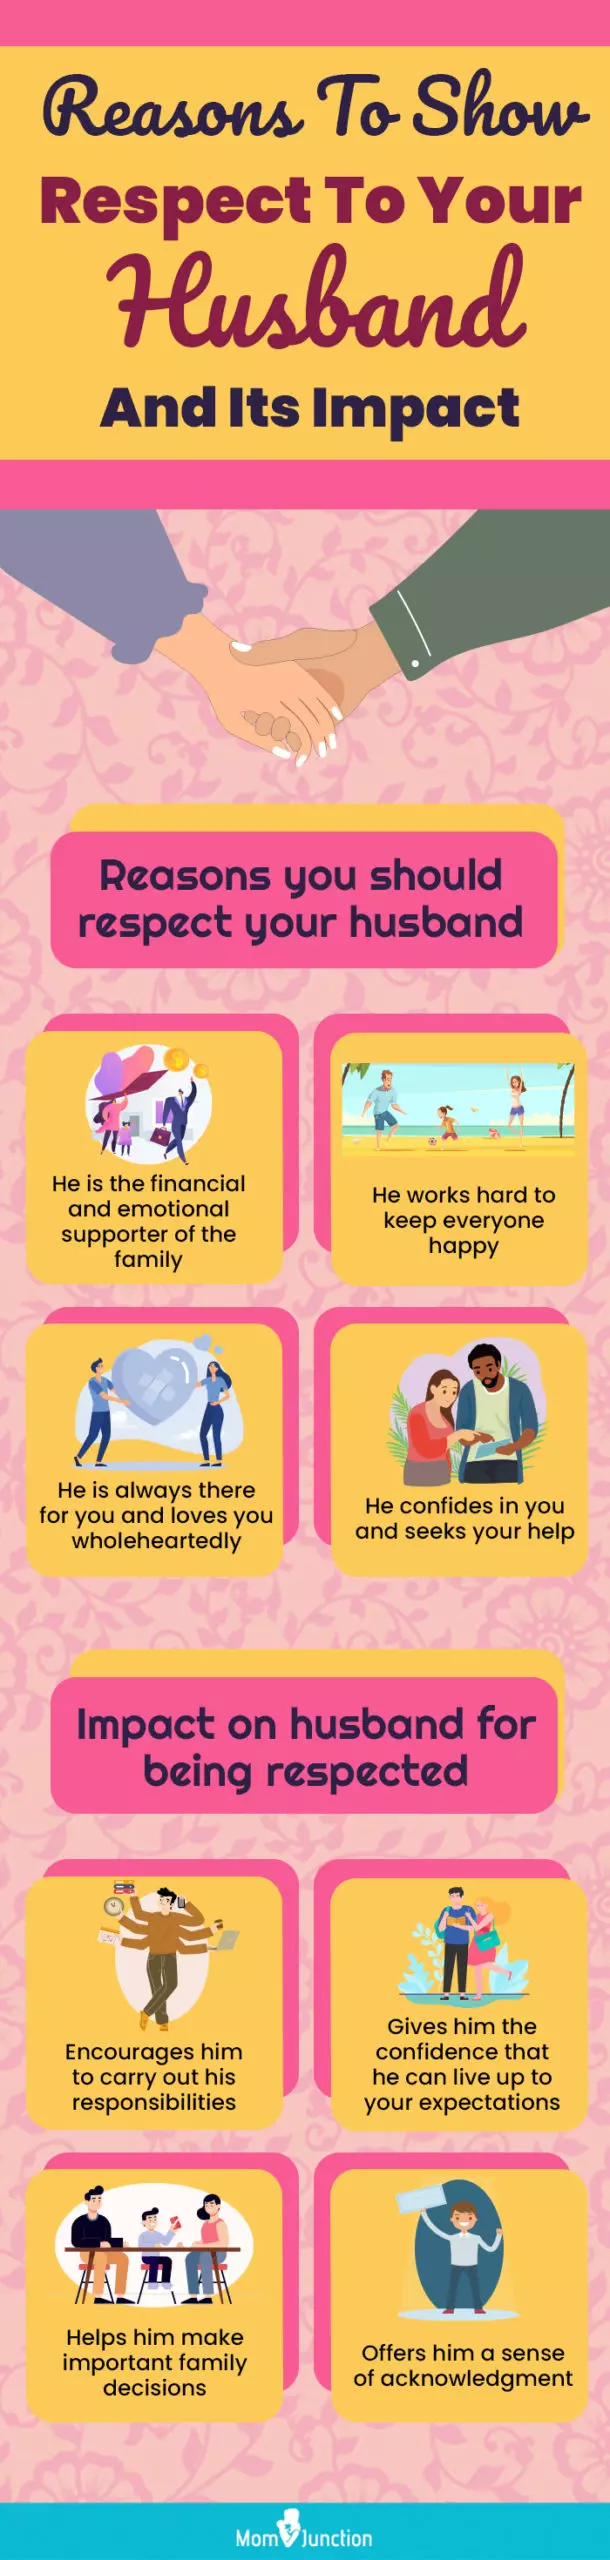 reasons to show respect to your husband and its impact (infographic)